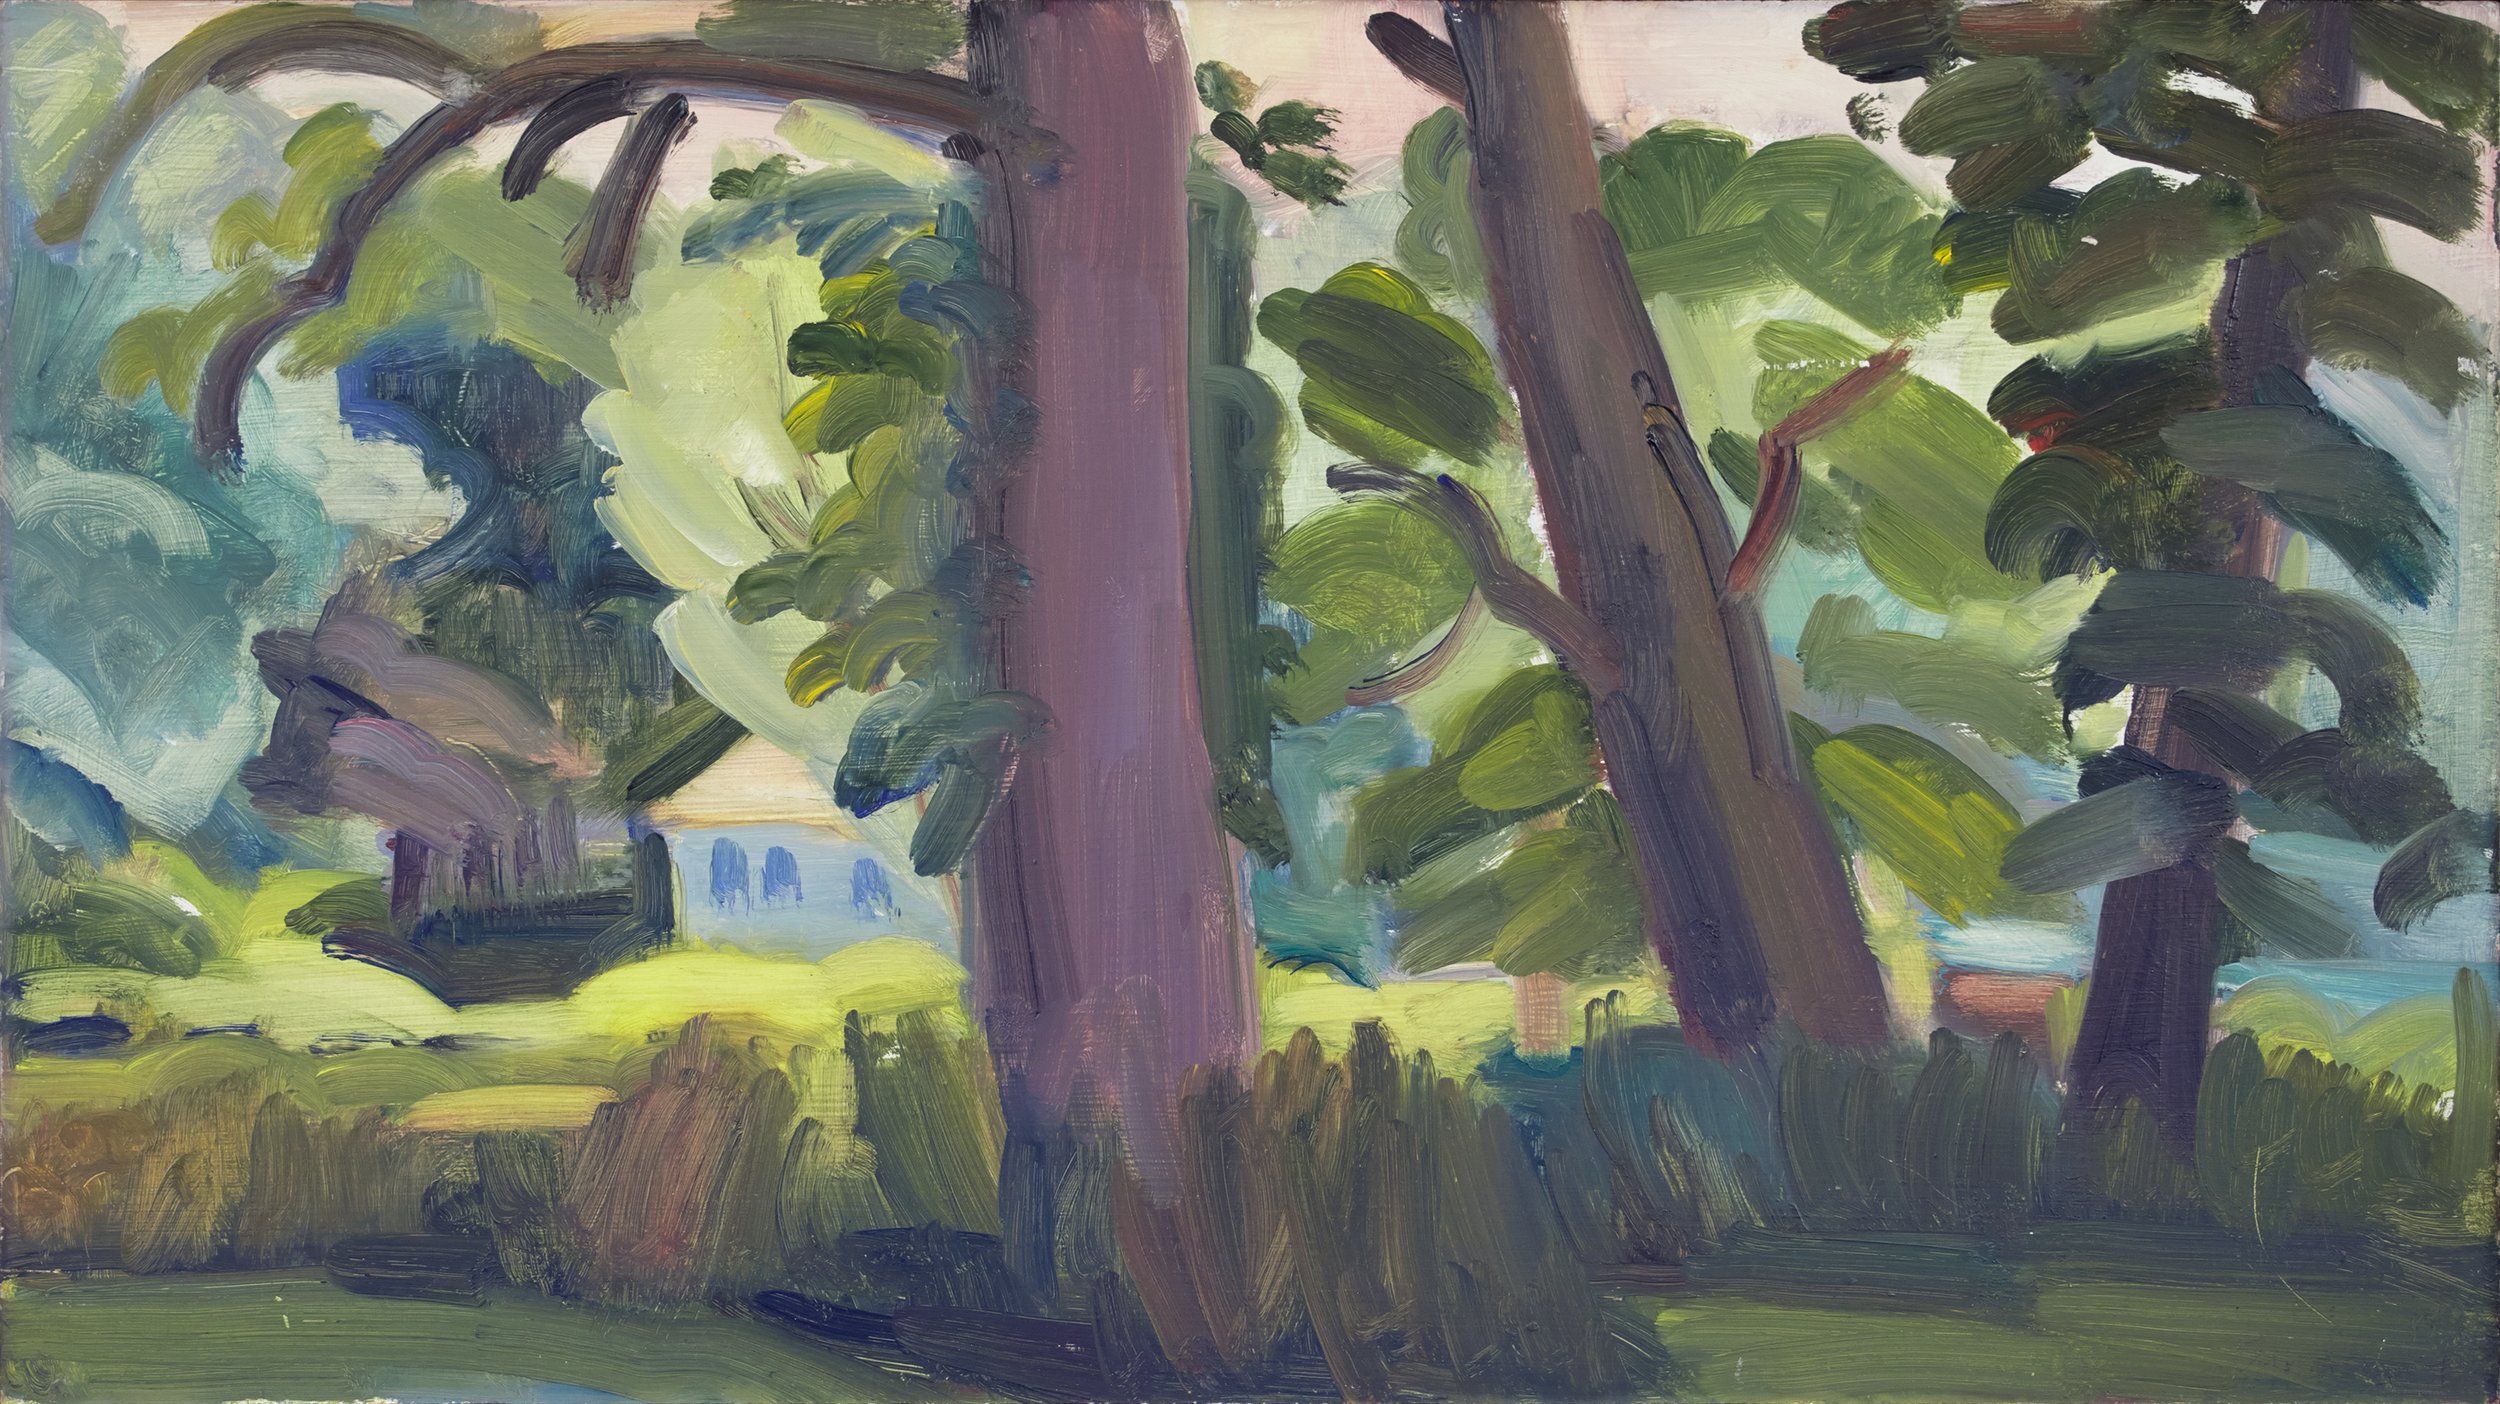   Stillwater House Through the Trees , 2005, oil on panel, 9" x 16"  (Not for sale)  